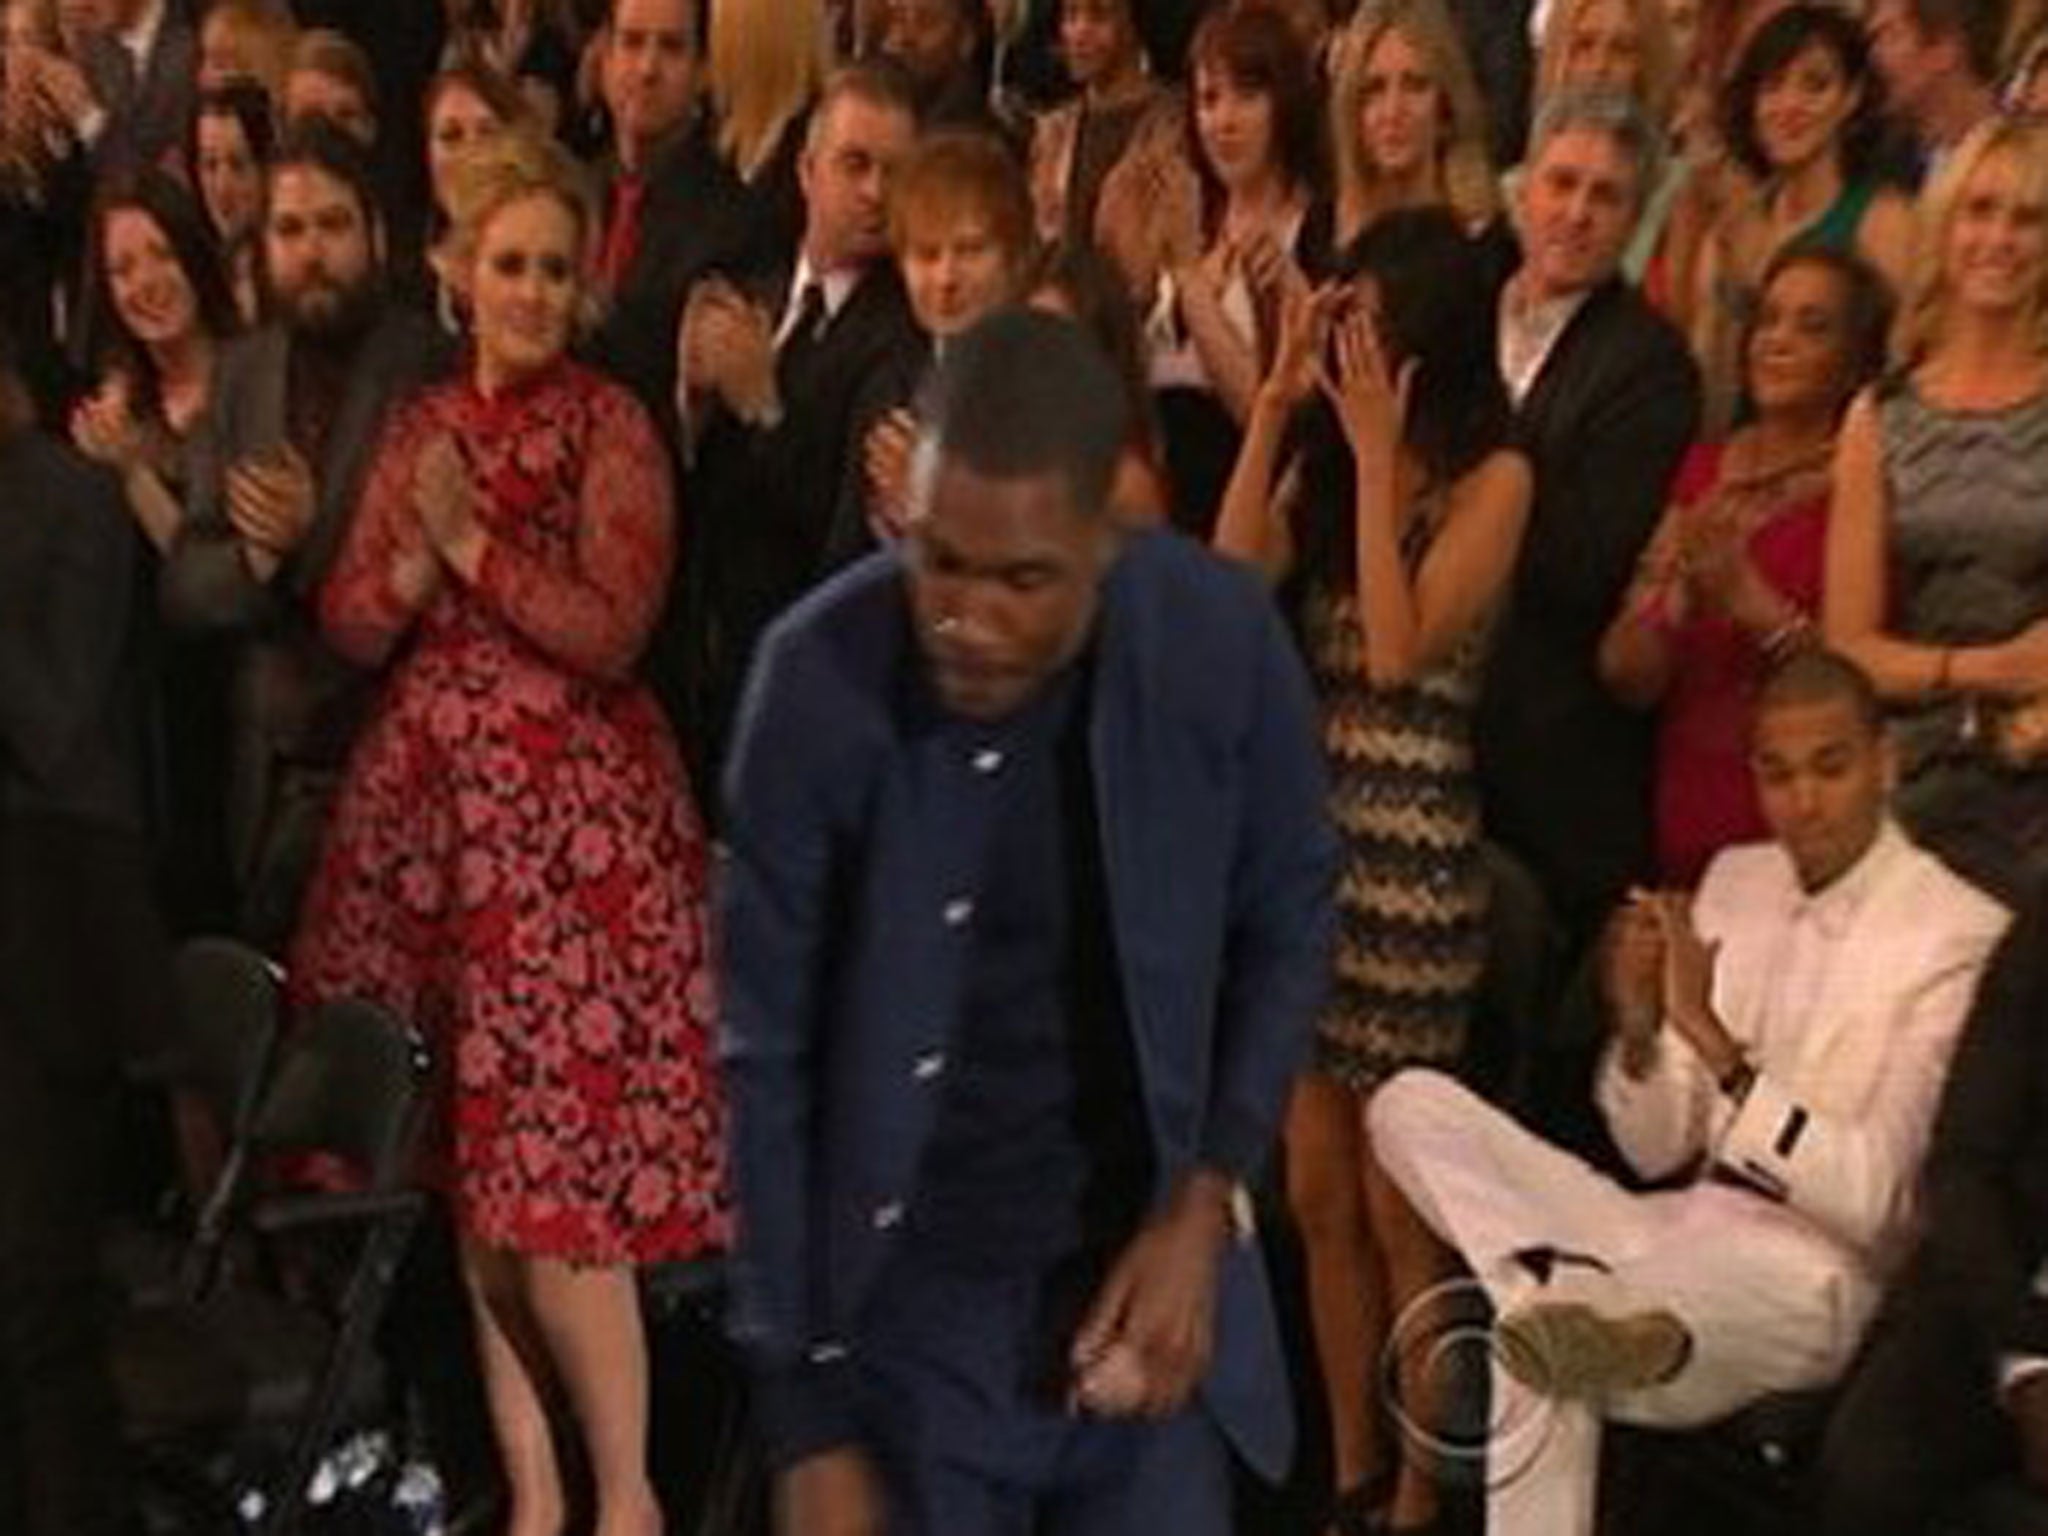 Chris Brown remains seated during a standing ovation for Frank Ocean at the 2013 Grammys